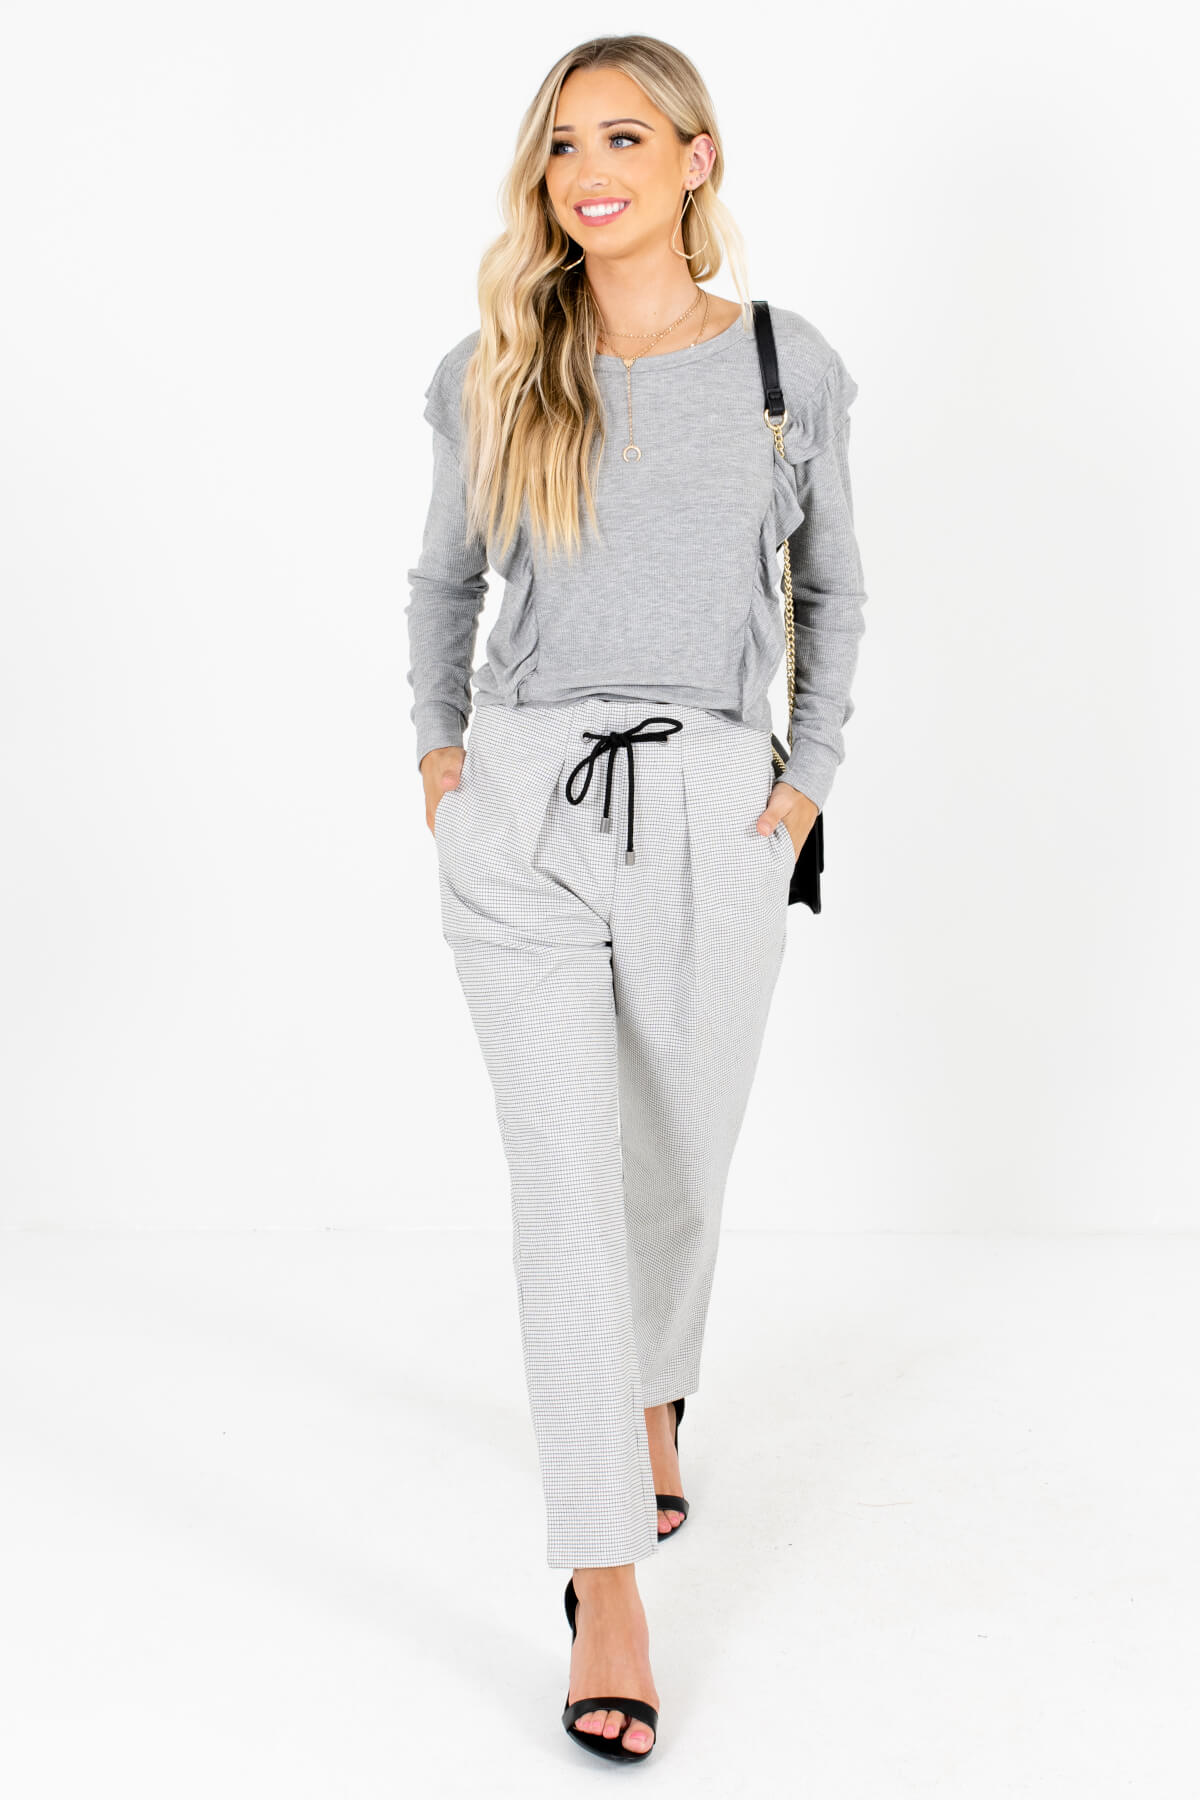 Women's Heather Gray Fall and Winter Boutique Clothing